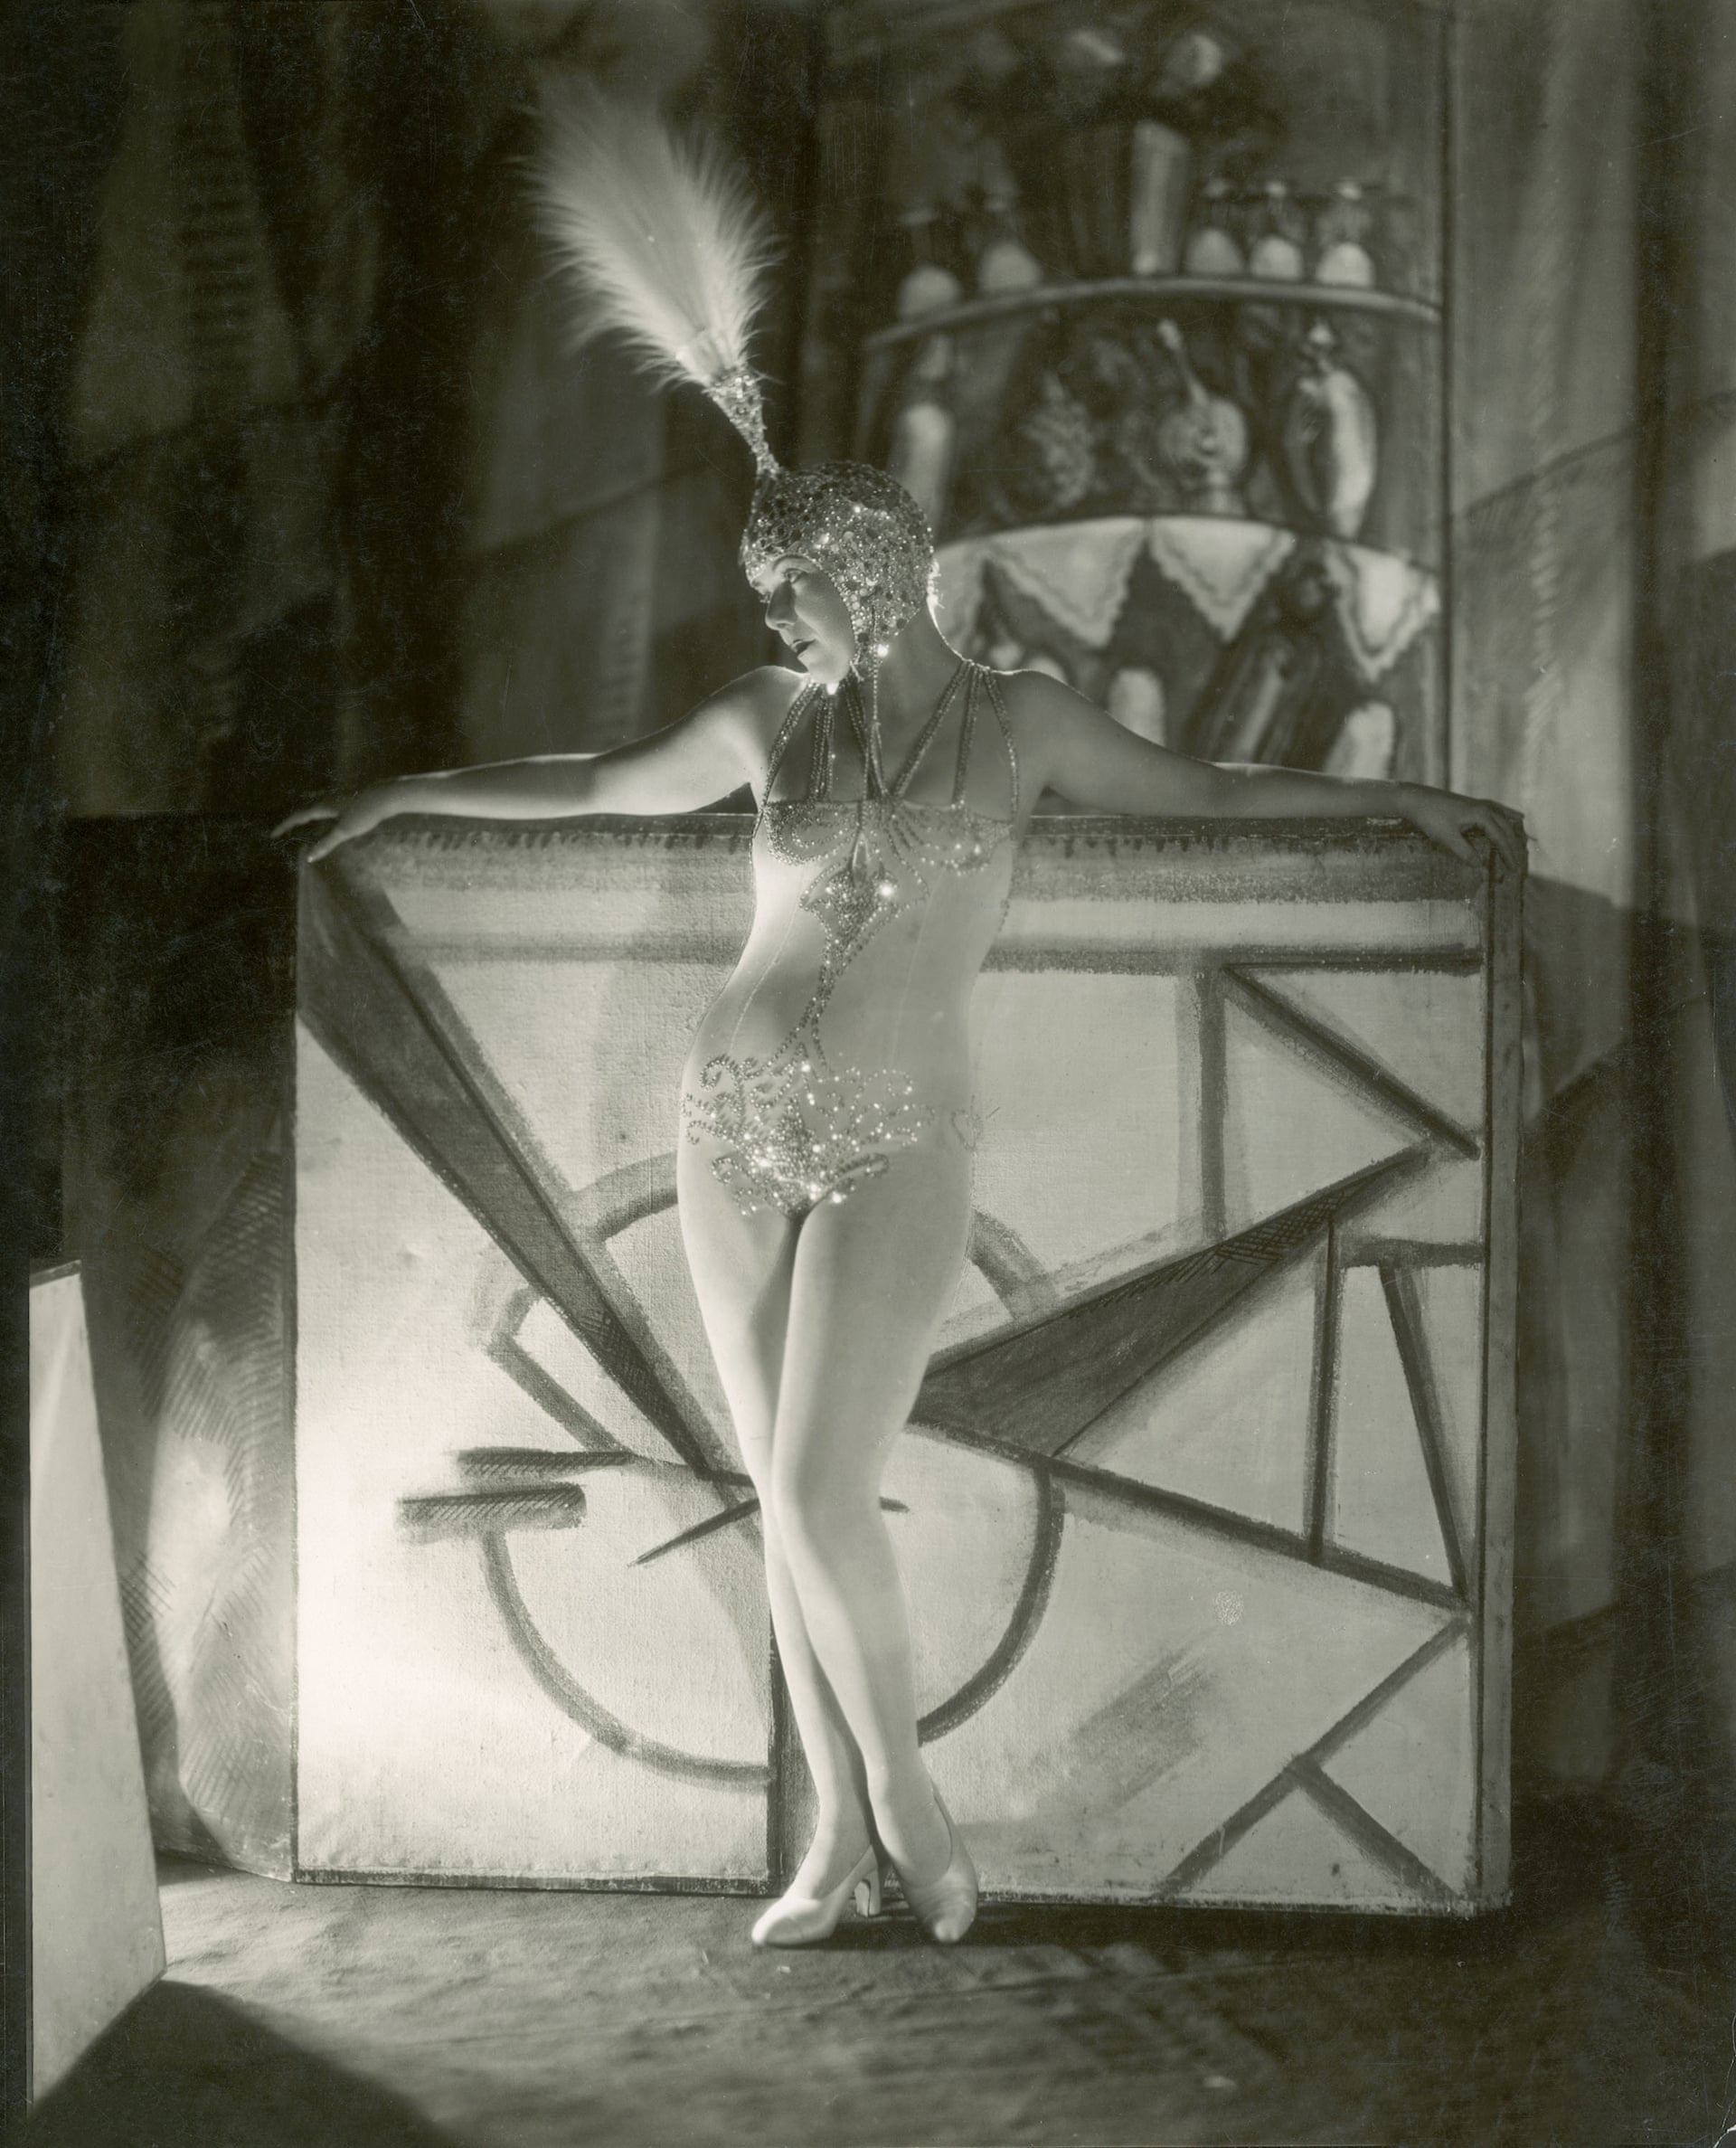 Andrée Spinelly, Paris, 1927. These bejewelled creations hit new heights of eroticism and sophistication in the outfits worn by dancers at Parisian nightclubs like the Moulin Rouge. src The Guardian: Fops and flappers: wild fashions of the 1920s